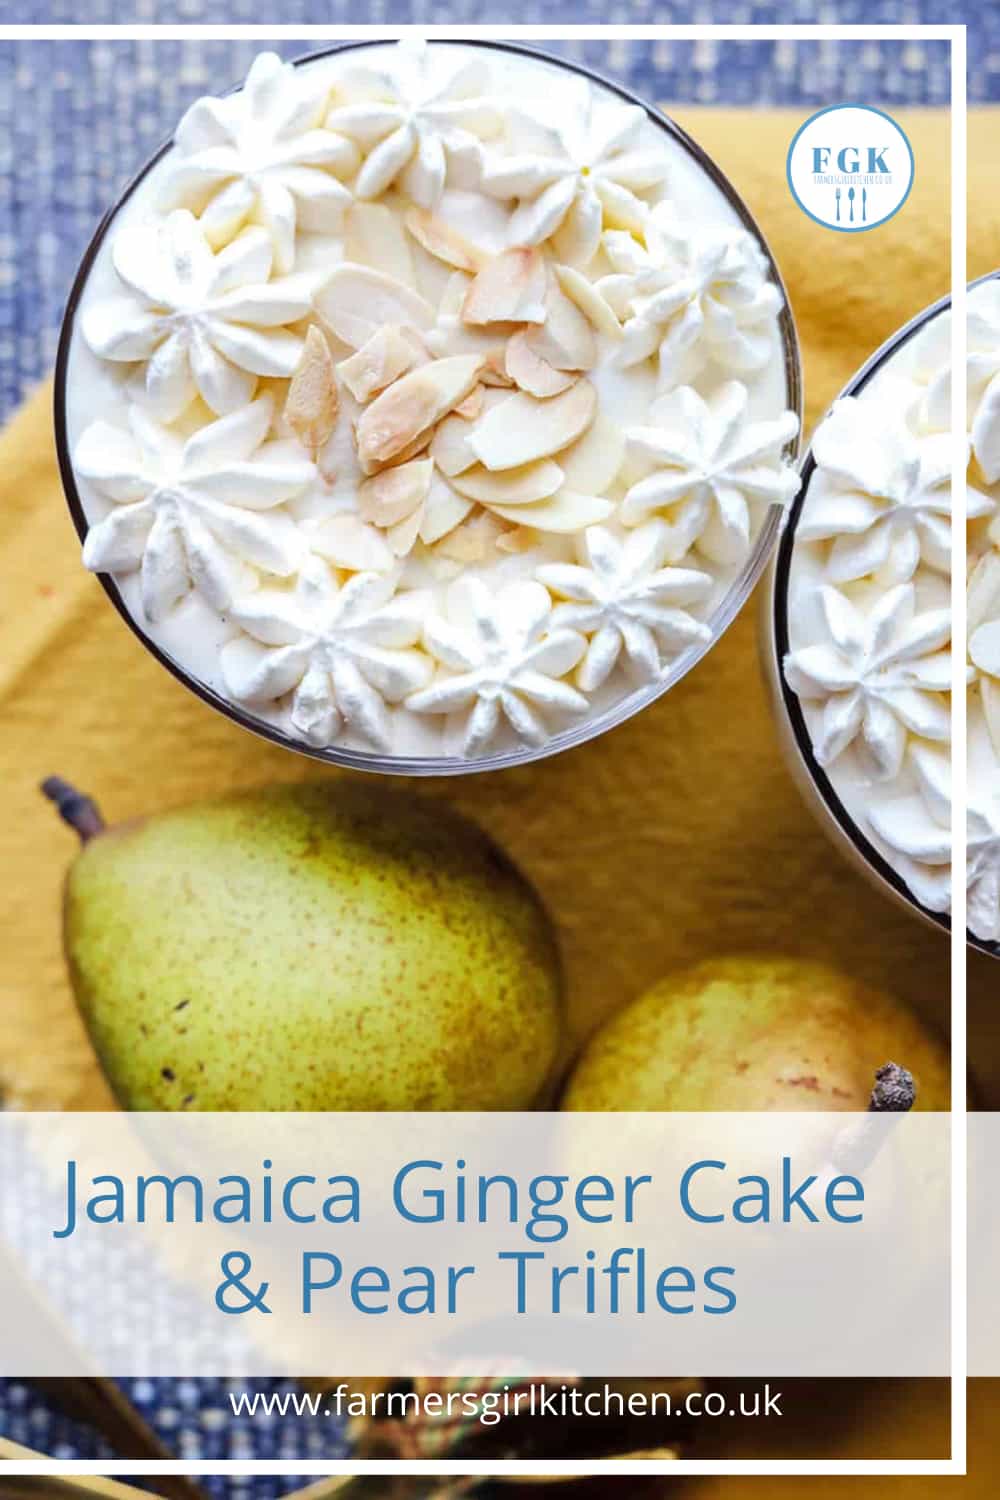 Jamaica Ginger Cake and Pear Trifles - Farmersgirl Kitchen